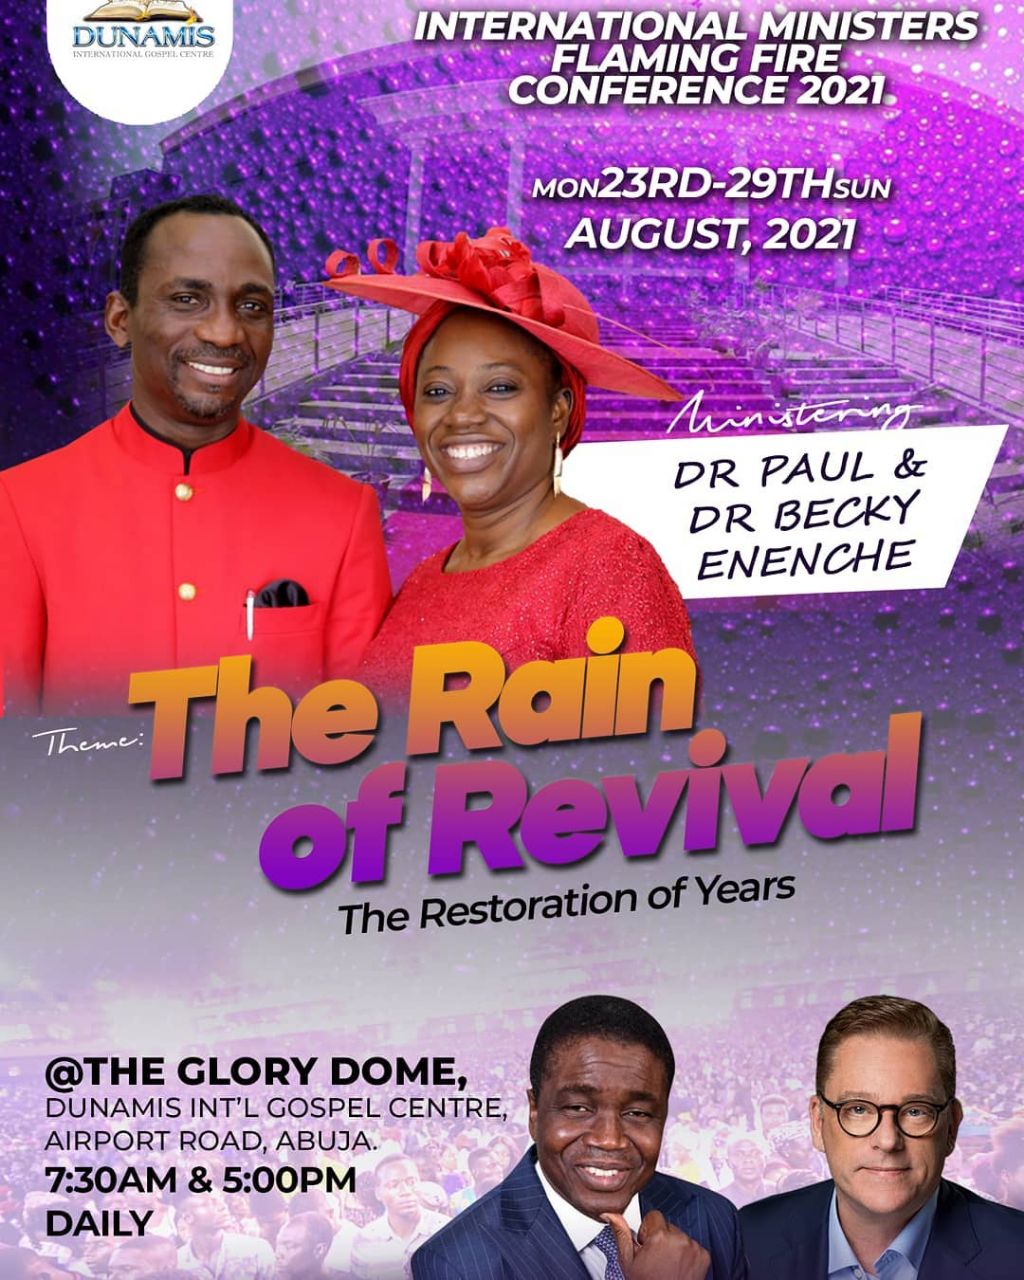 DUNAMIS INTERNATIONAL MINISTER'S FLAMING FIRE CONFERENCE 